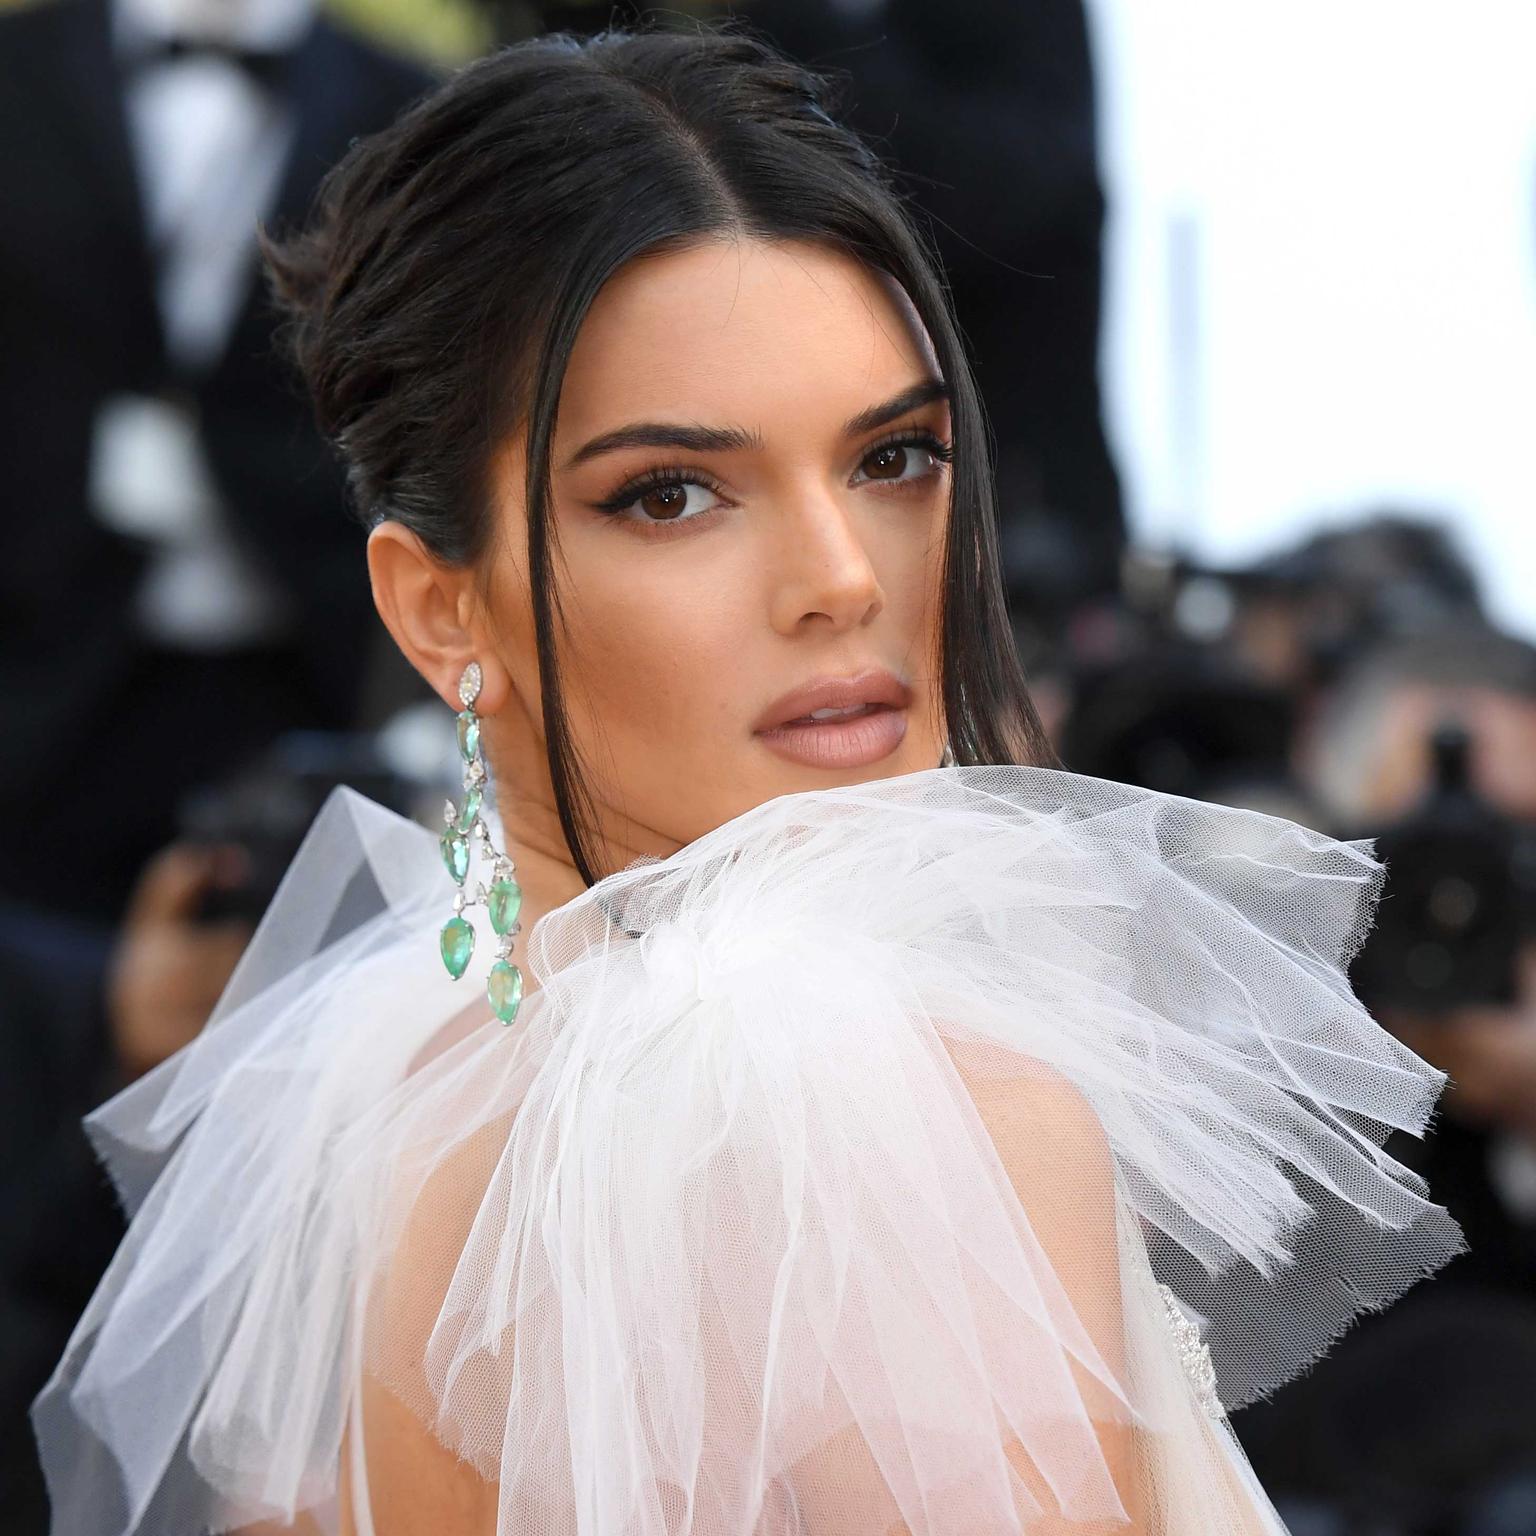 Kendall Jenner in Chopard jewels at Cannes Film Festival 